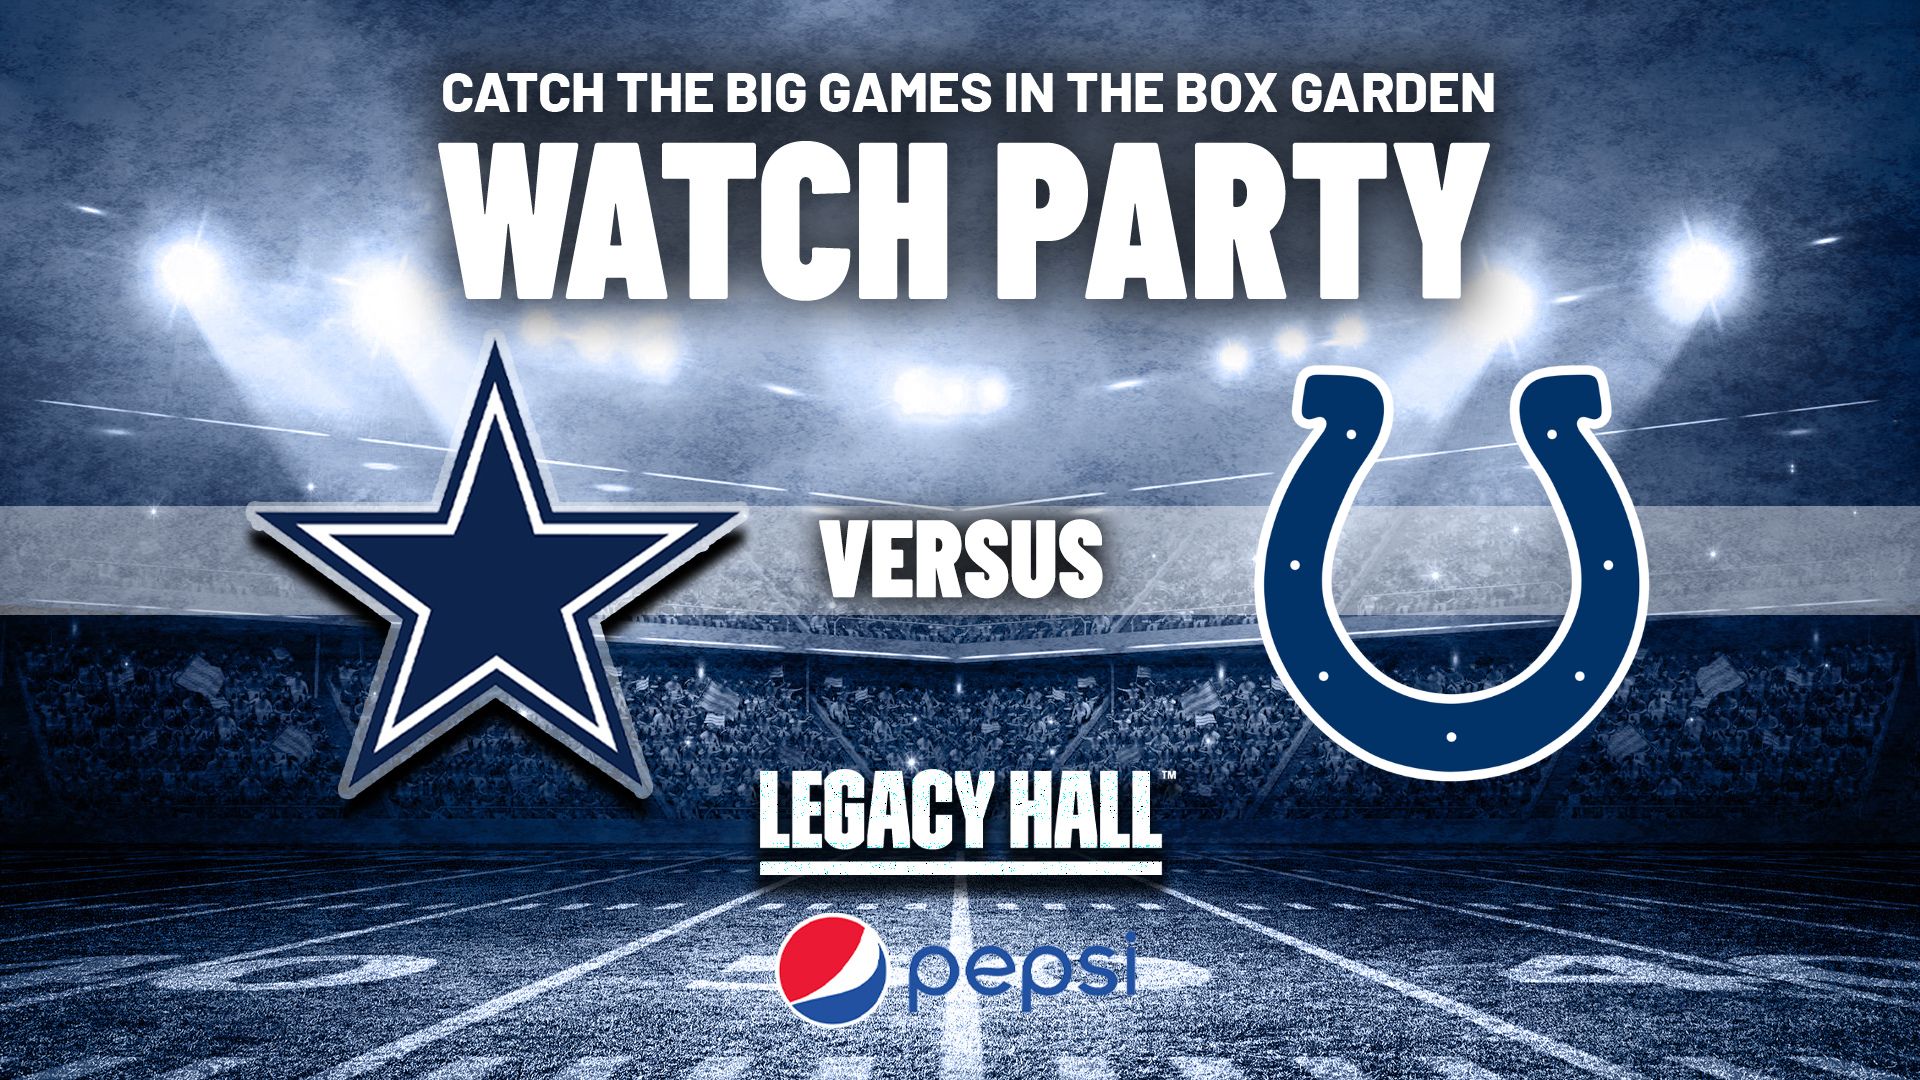 Cowboys vs. Colts Watch Party - hero